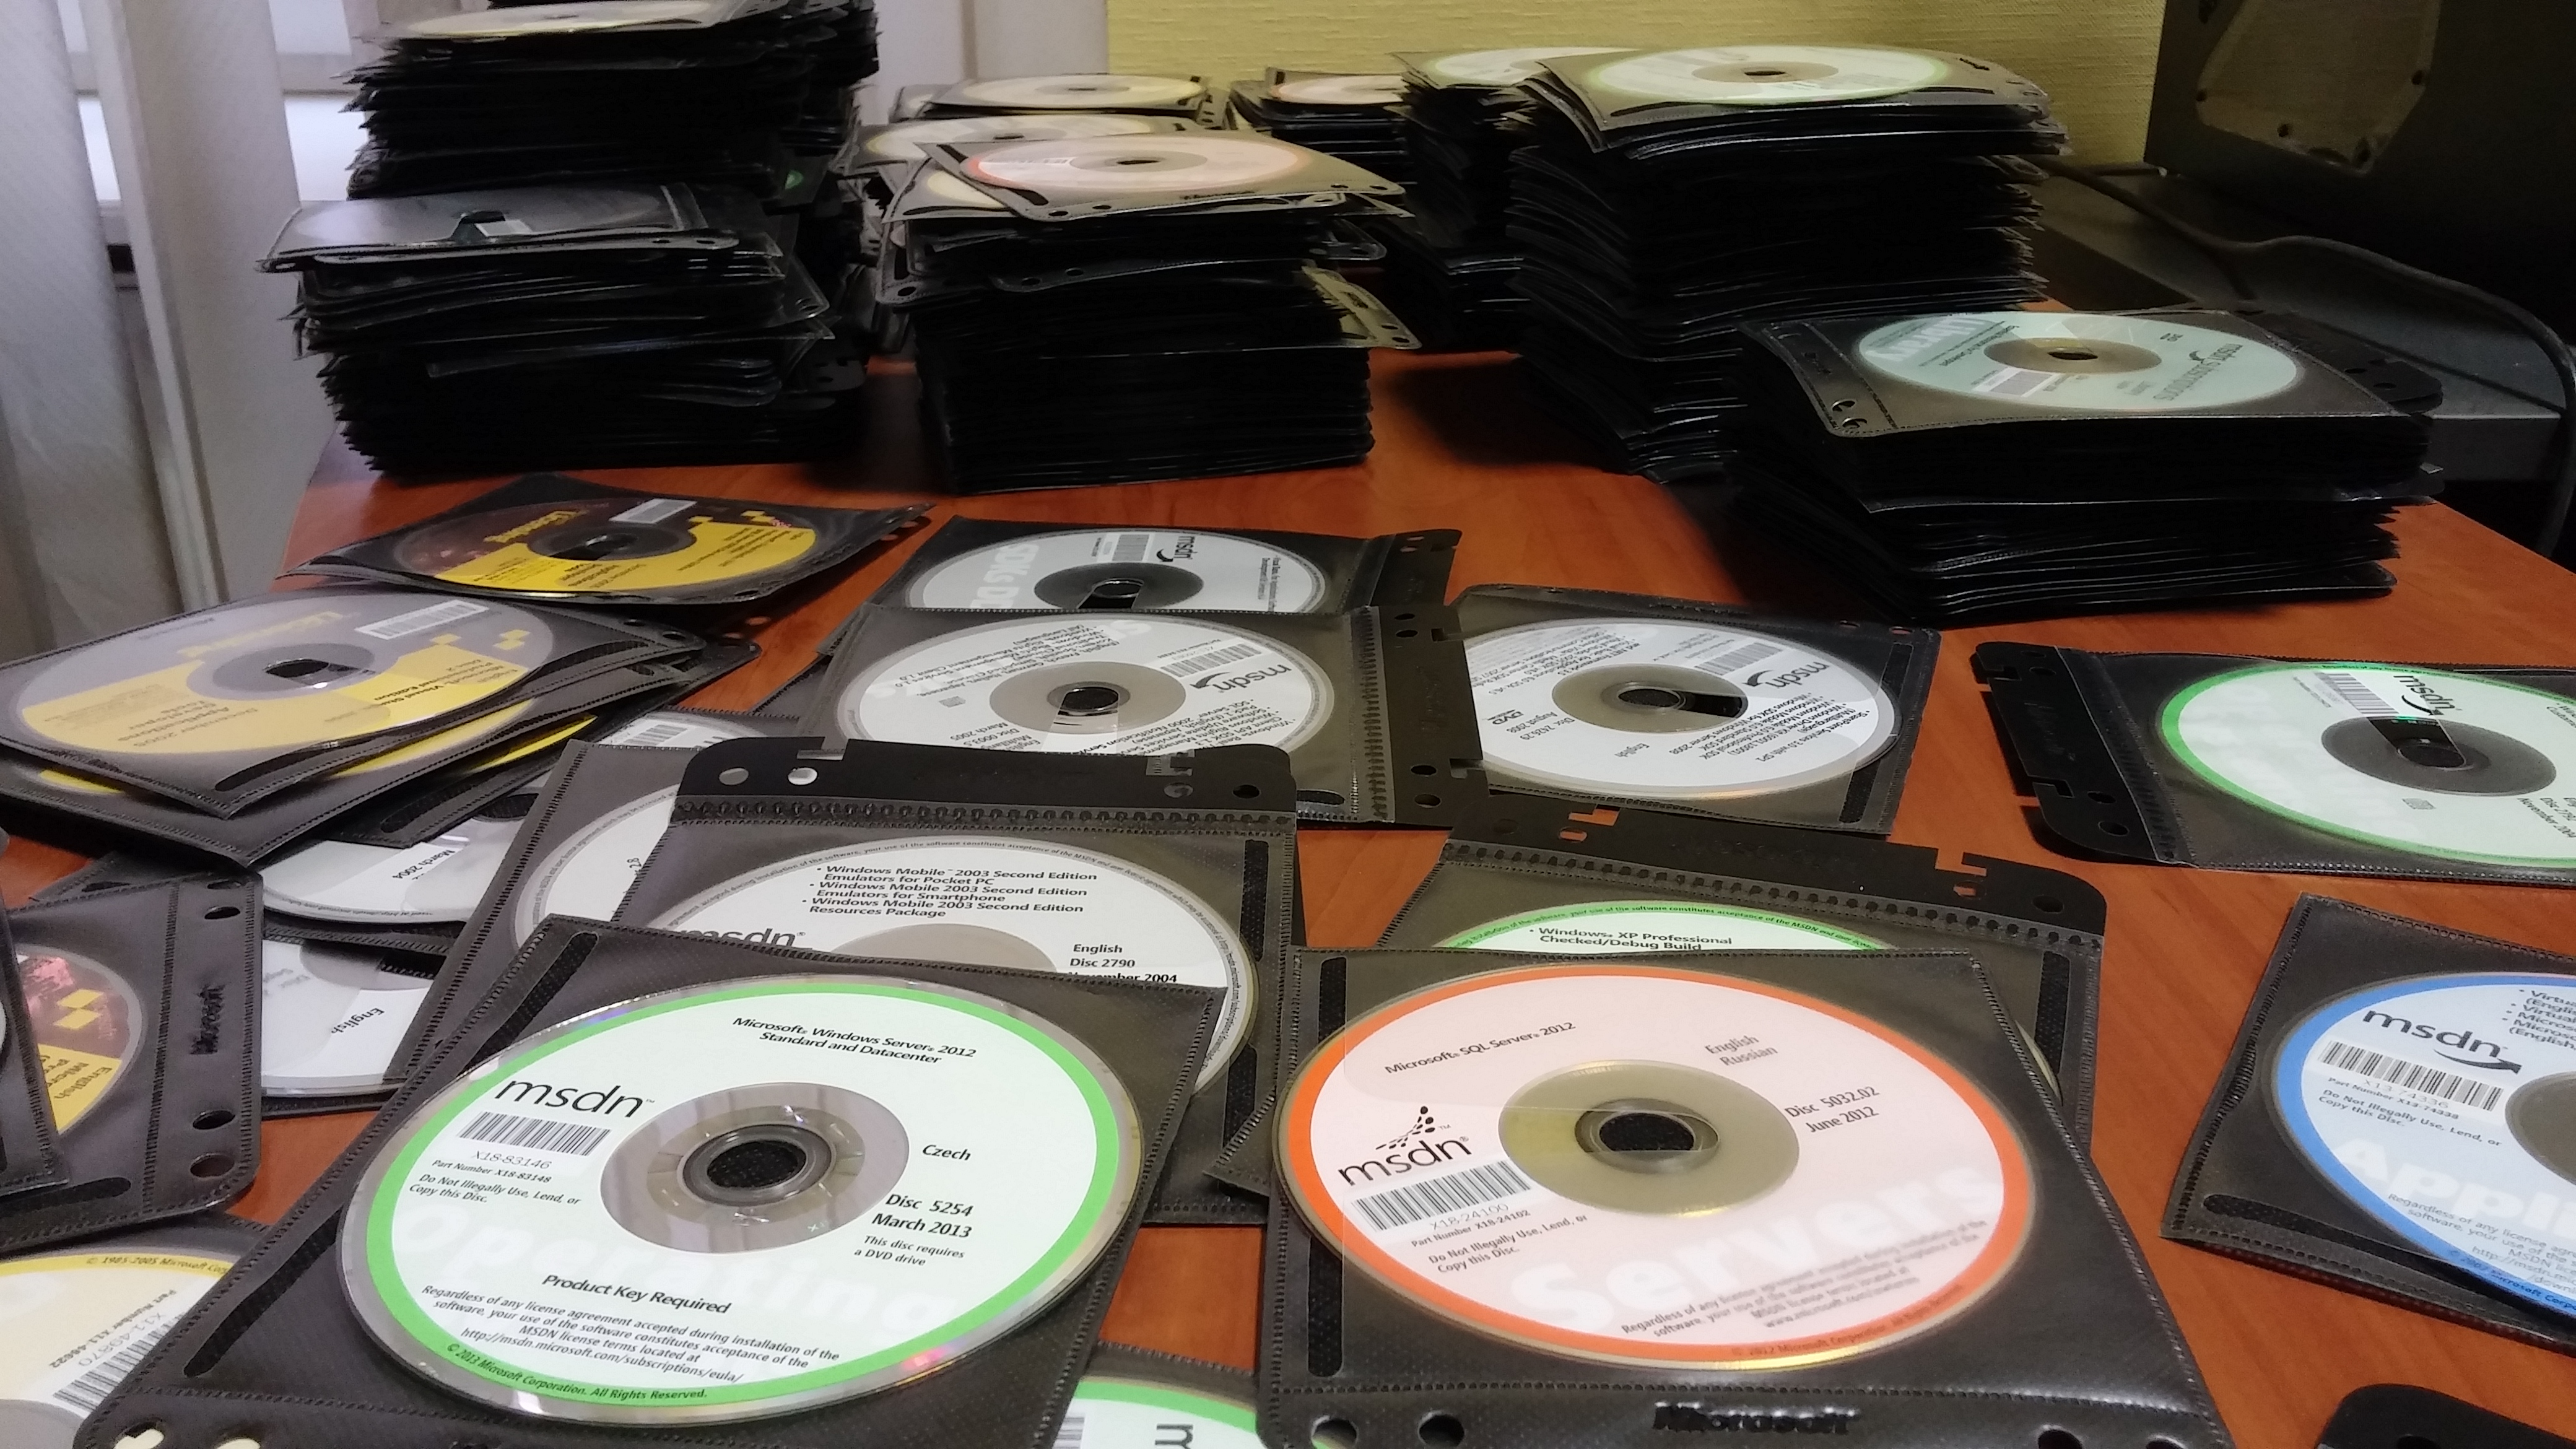 Too many MSDN disks with cases